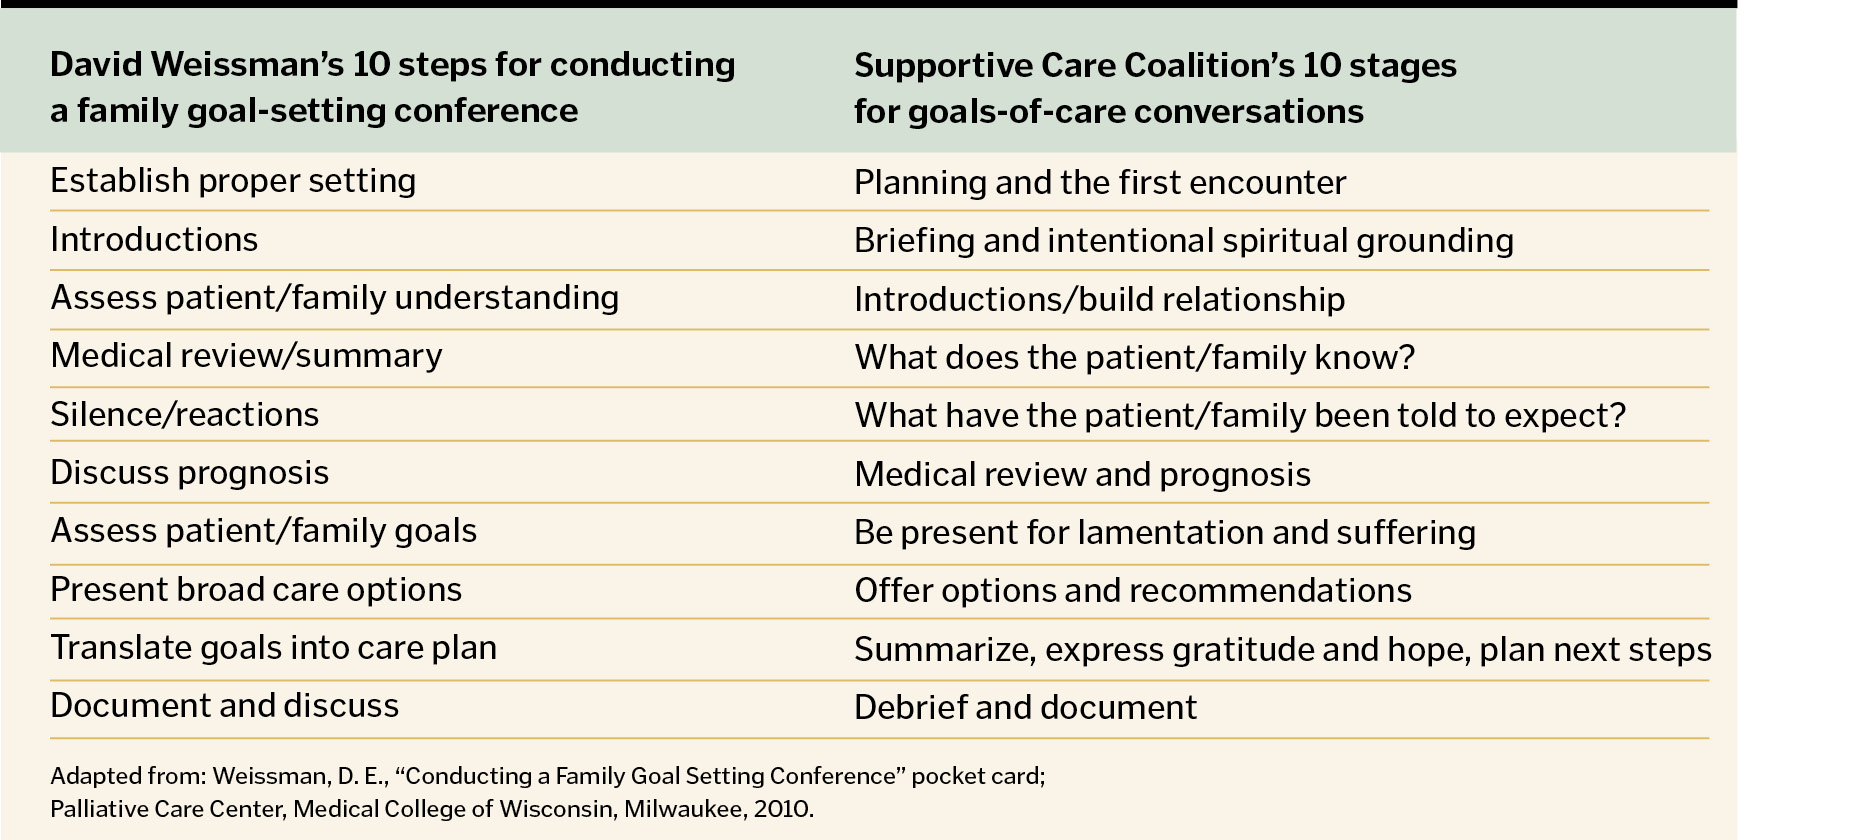 10 Steps for Conducting a Family Goal-Setting Conference